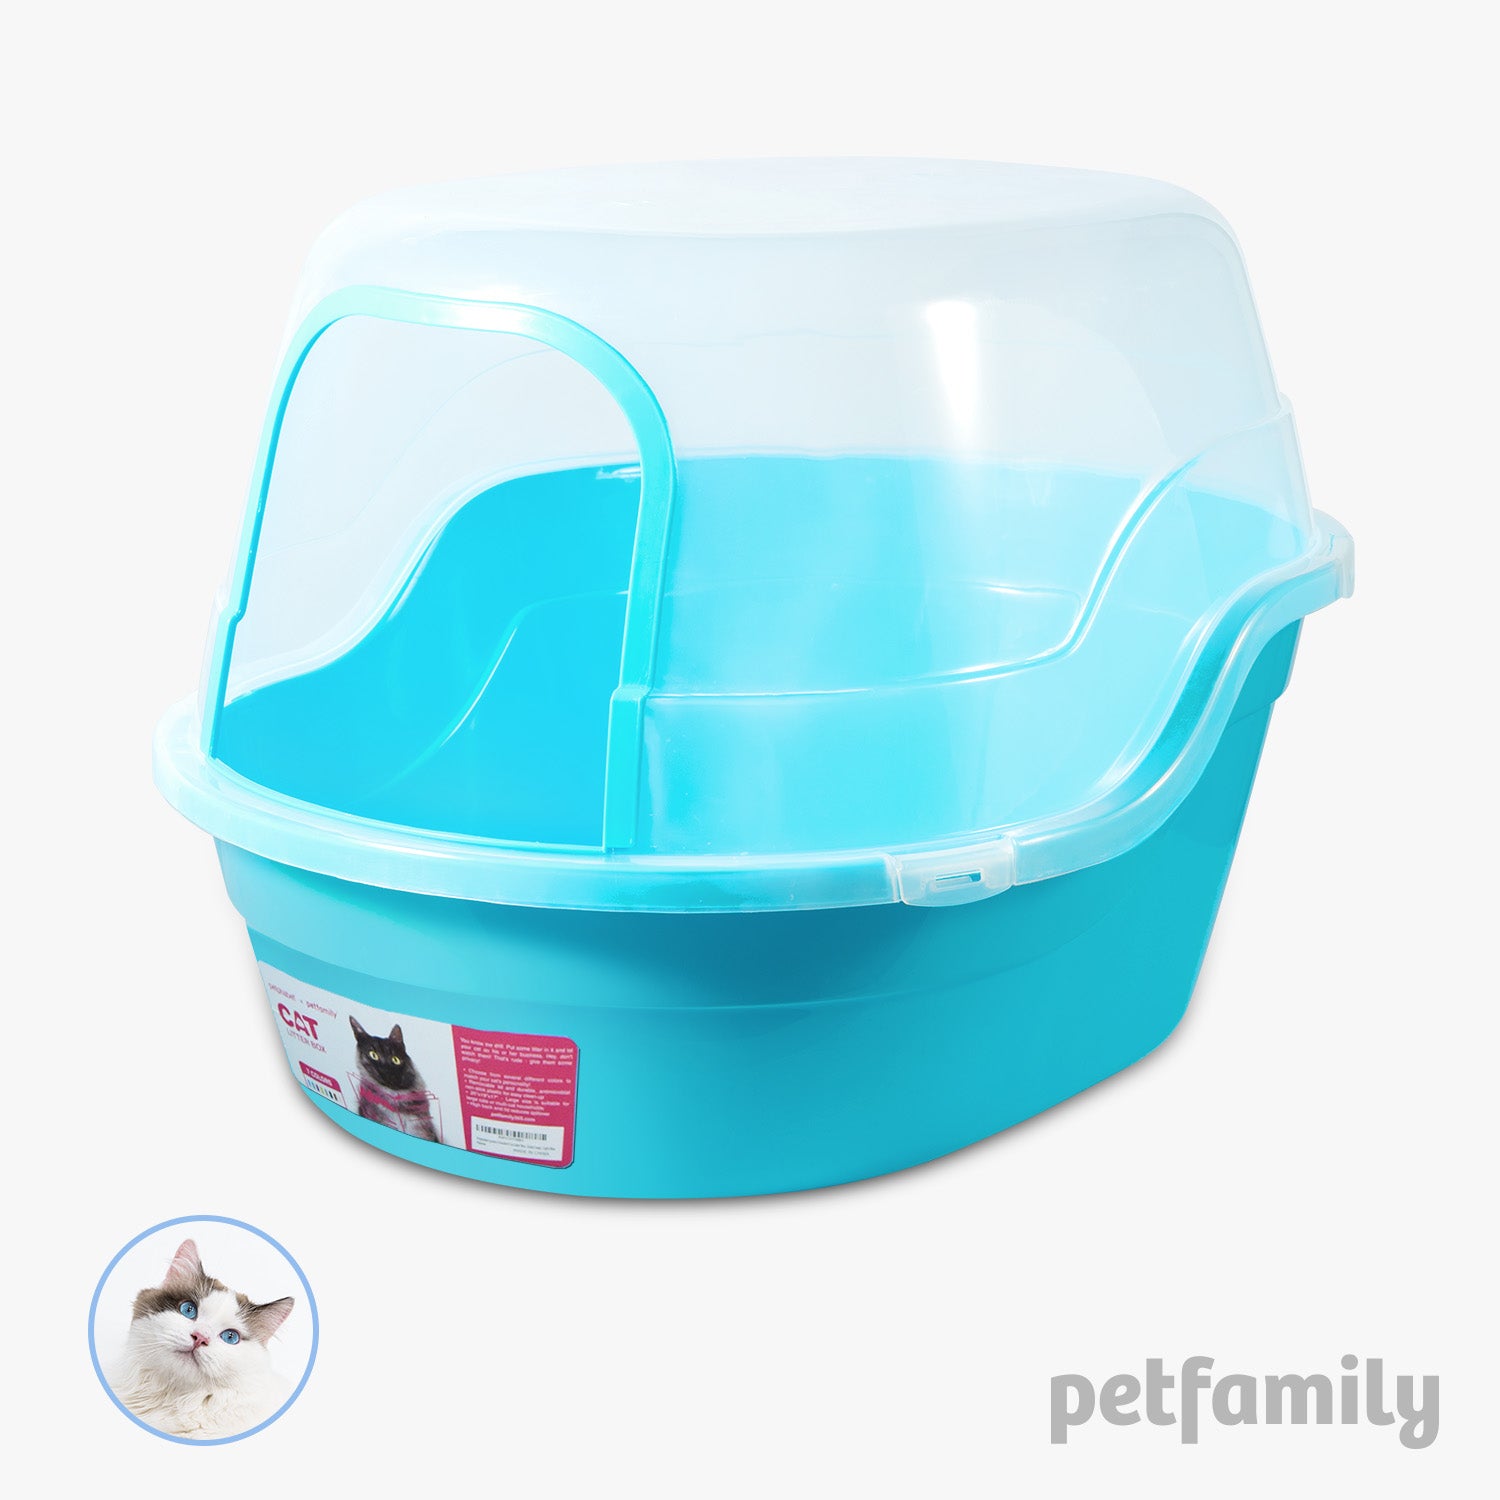 Jumbo Hooded Cat Litter Box - Extra Large for Big Cats and Multi-cat Families